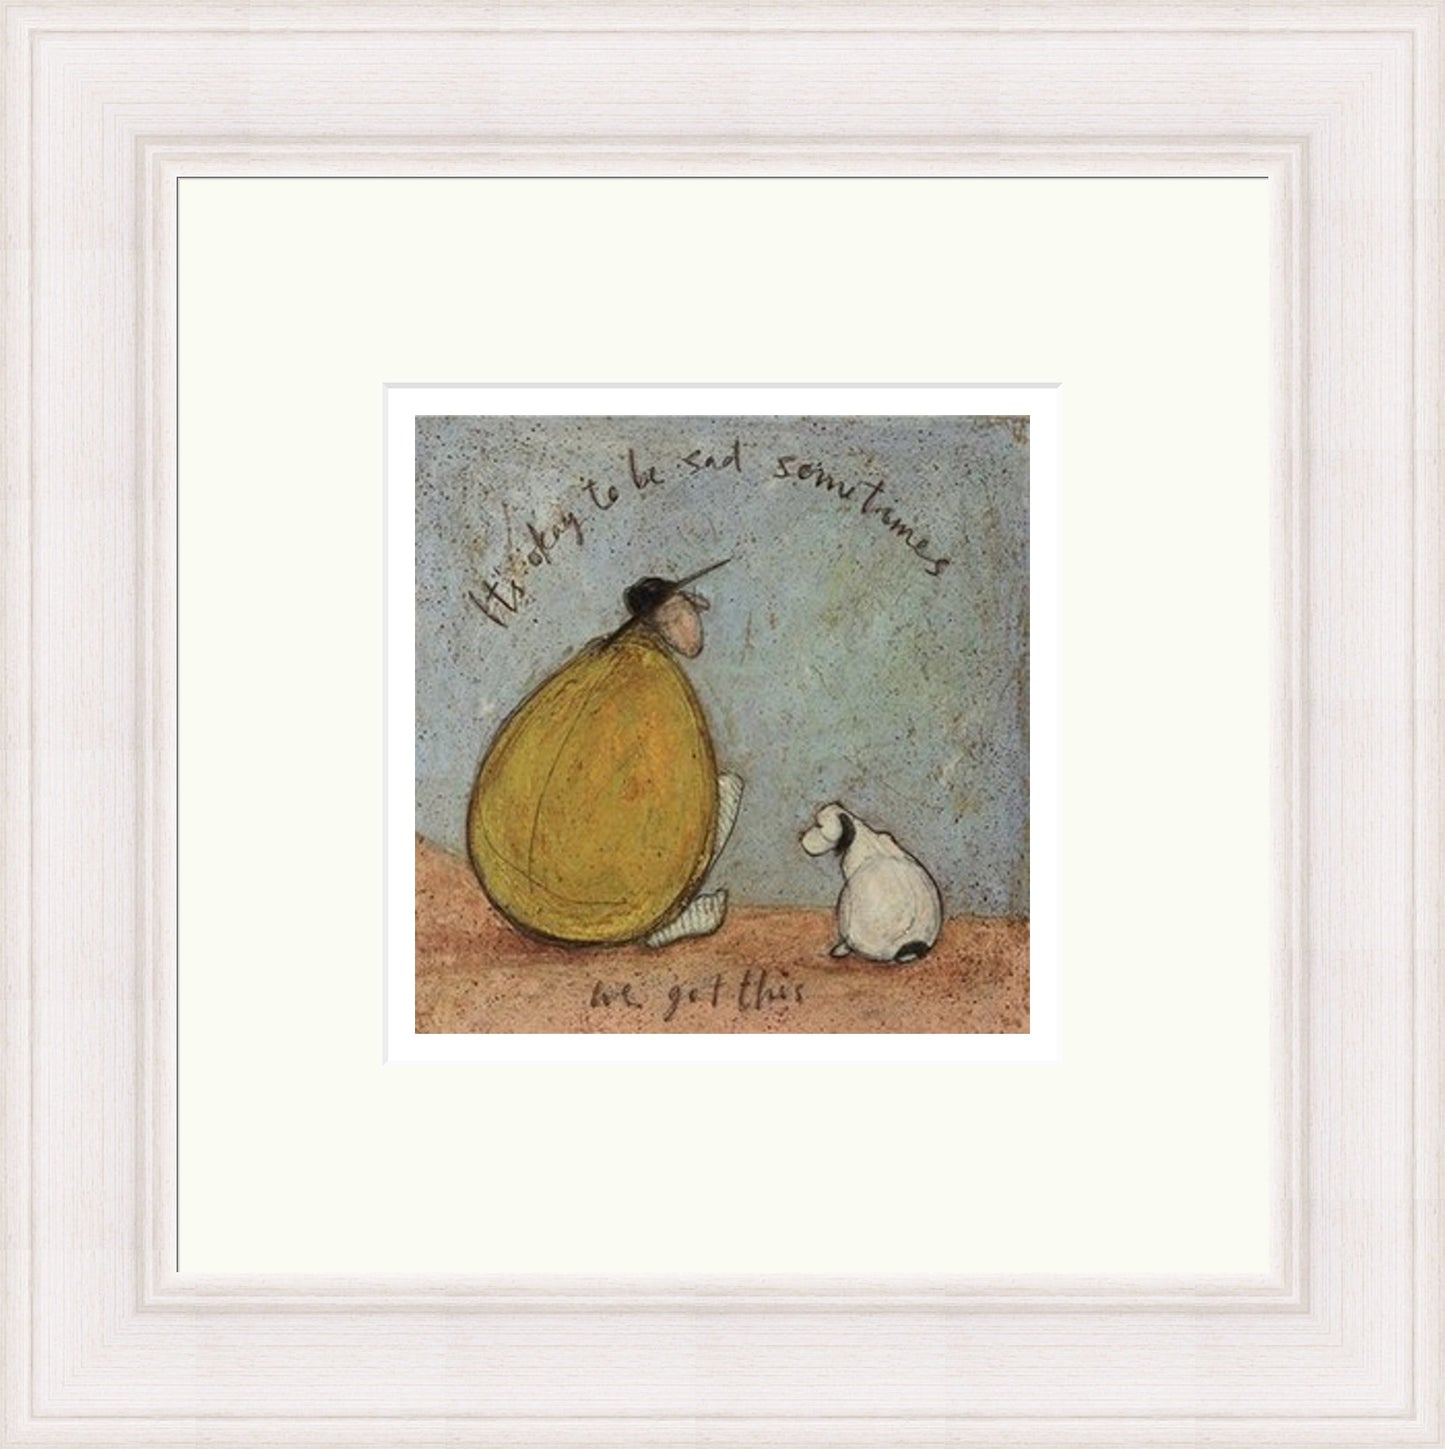 We Got This by Sam Toft